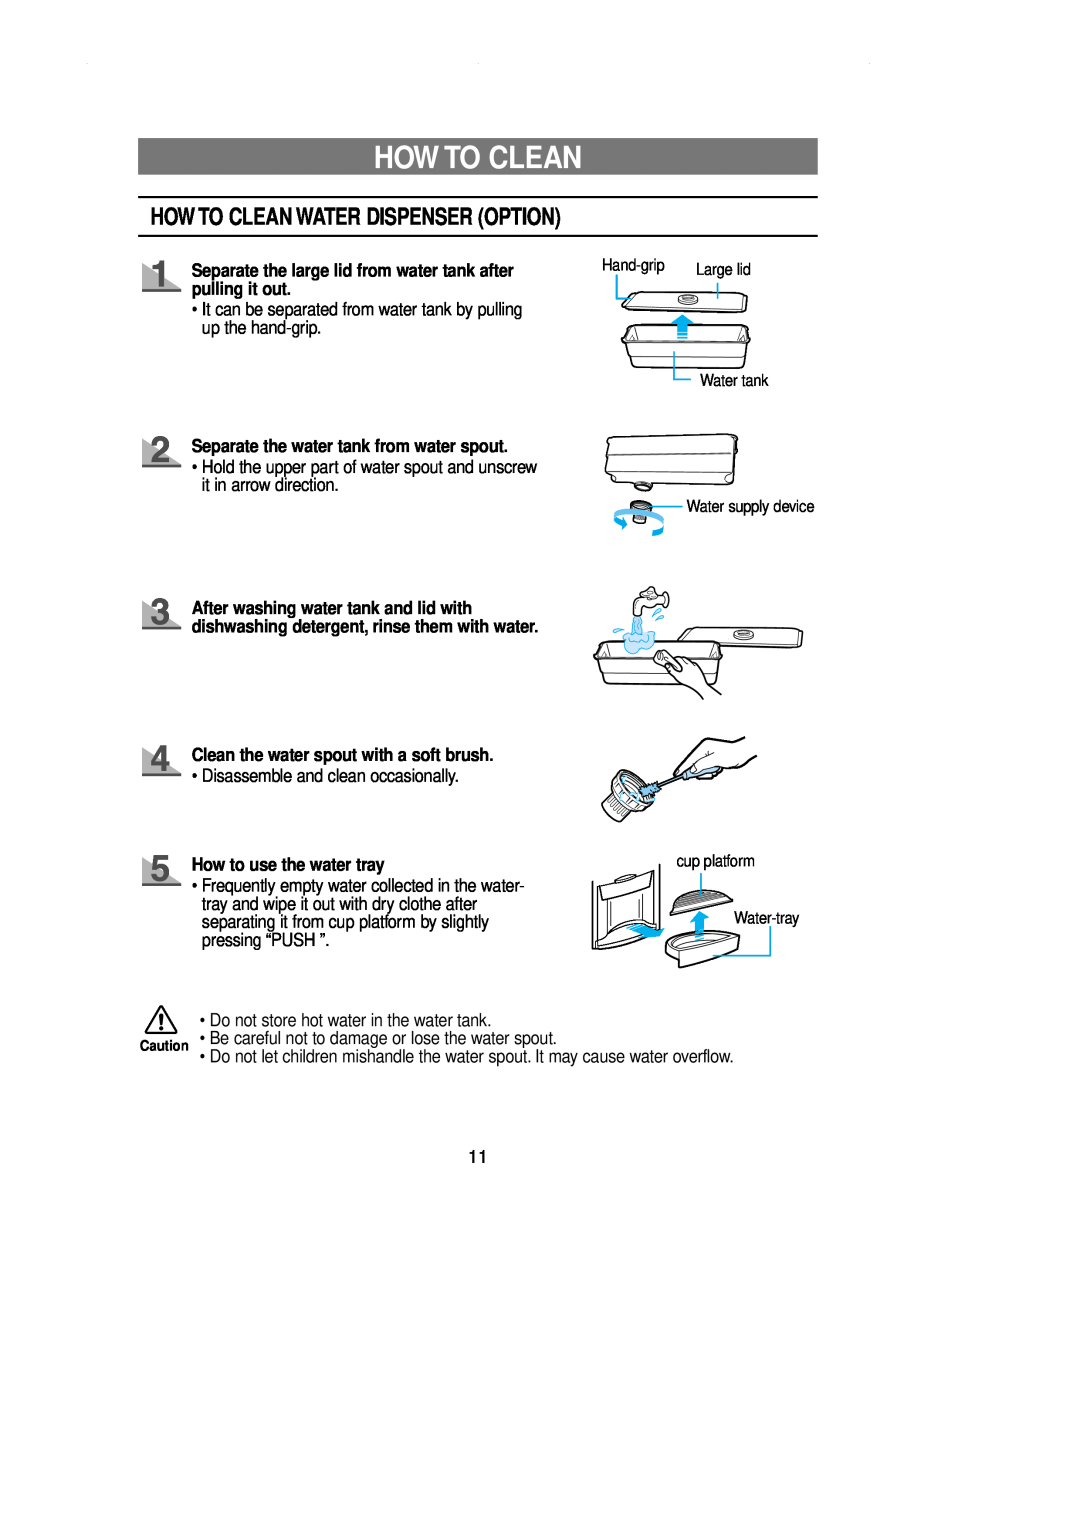 Samsung DA99-00743A How To Clean Water Dispenser Option, Separate the large lid from water tank after pulling it out 